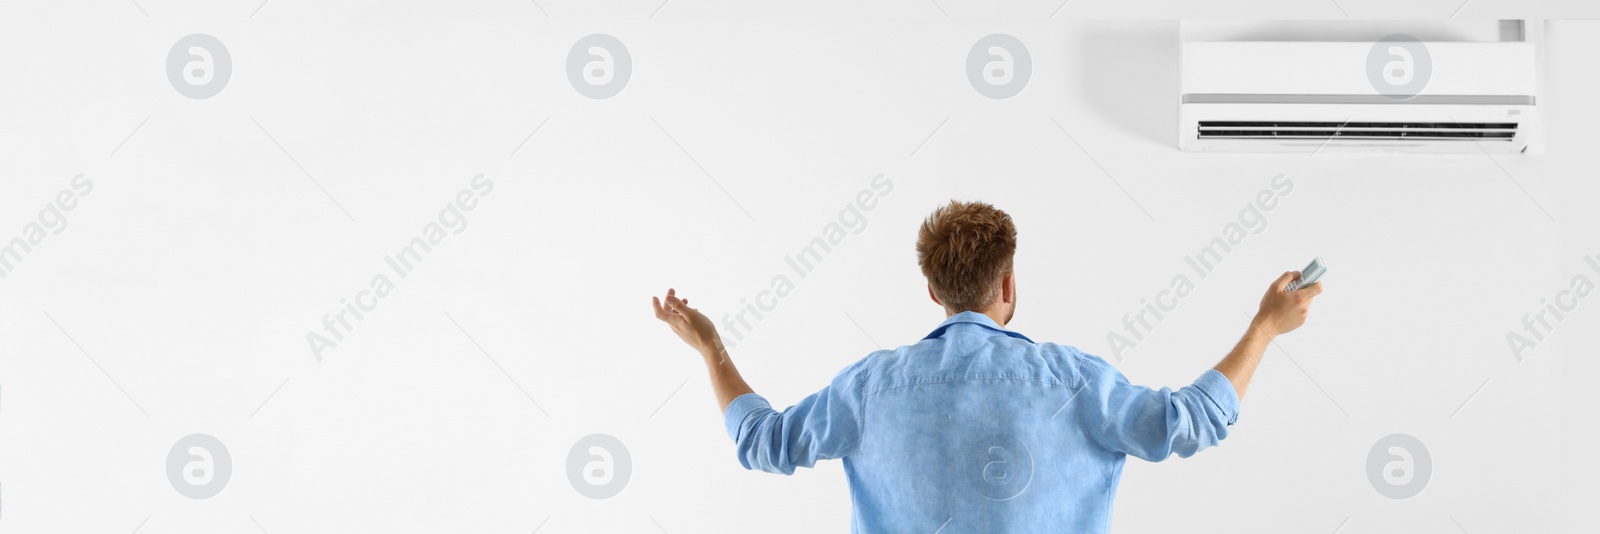 Image of Young man operating air conditioner with remote control indoors, space for text. Banner design